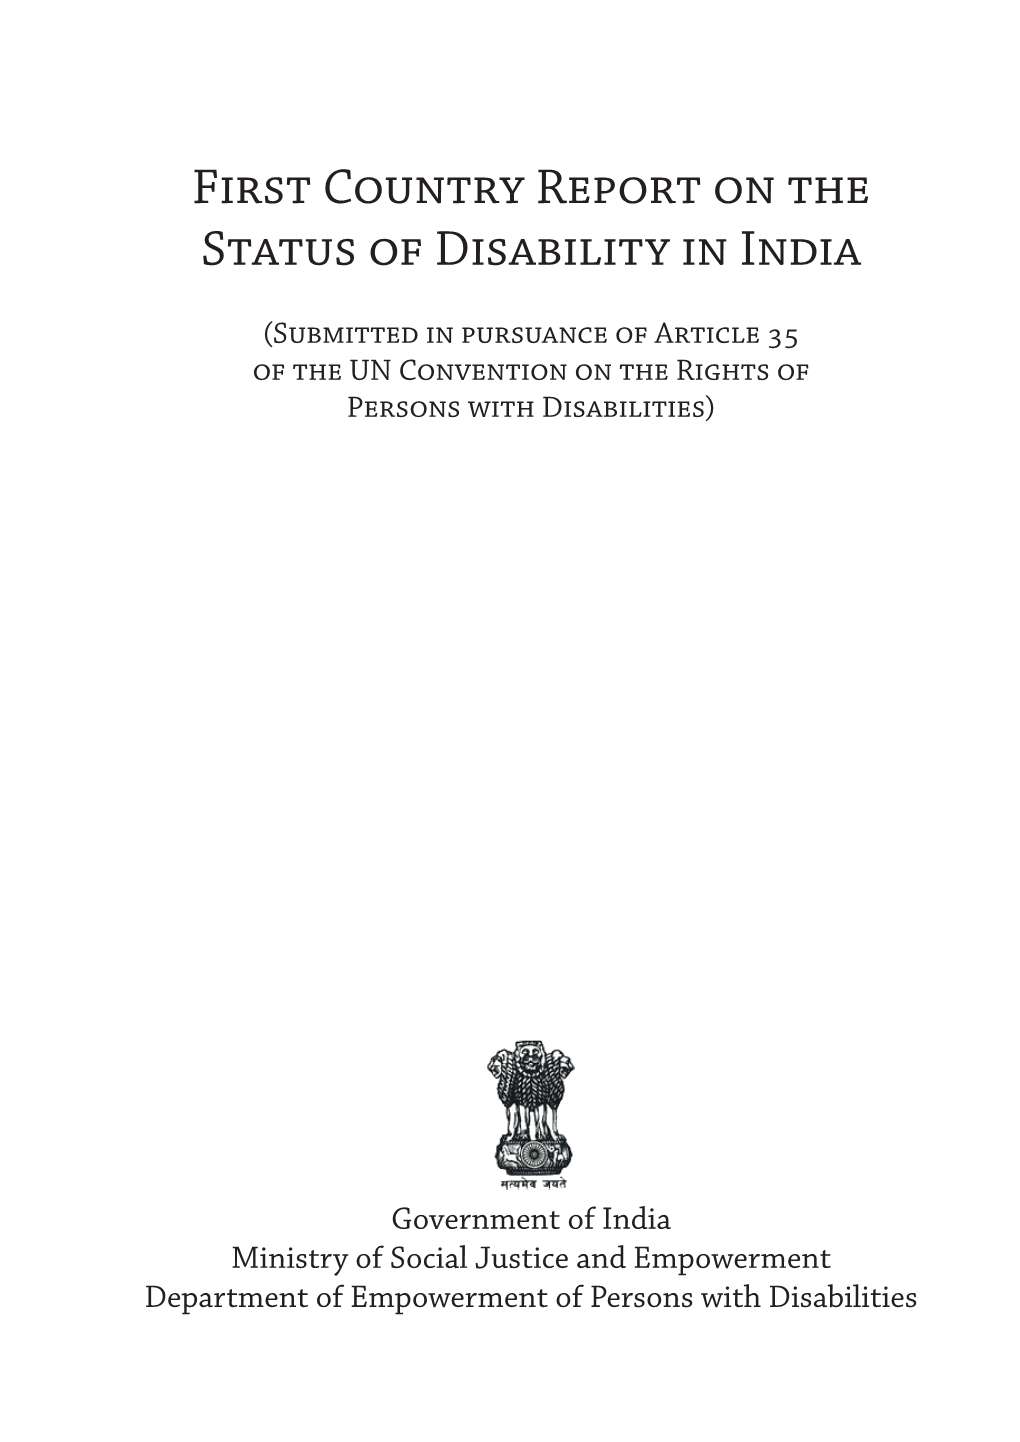 First Country Report on the Status of Disability in India